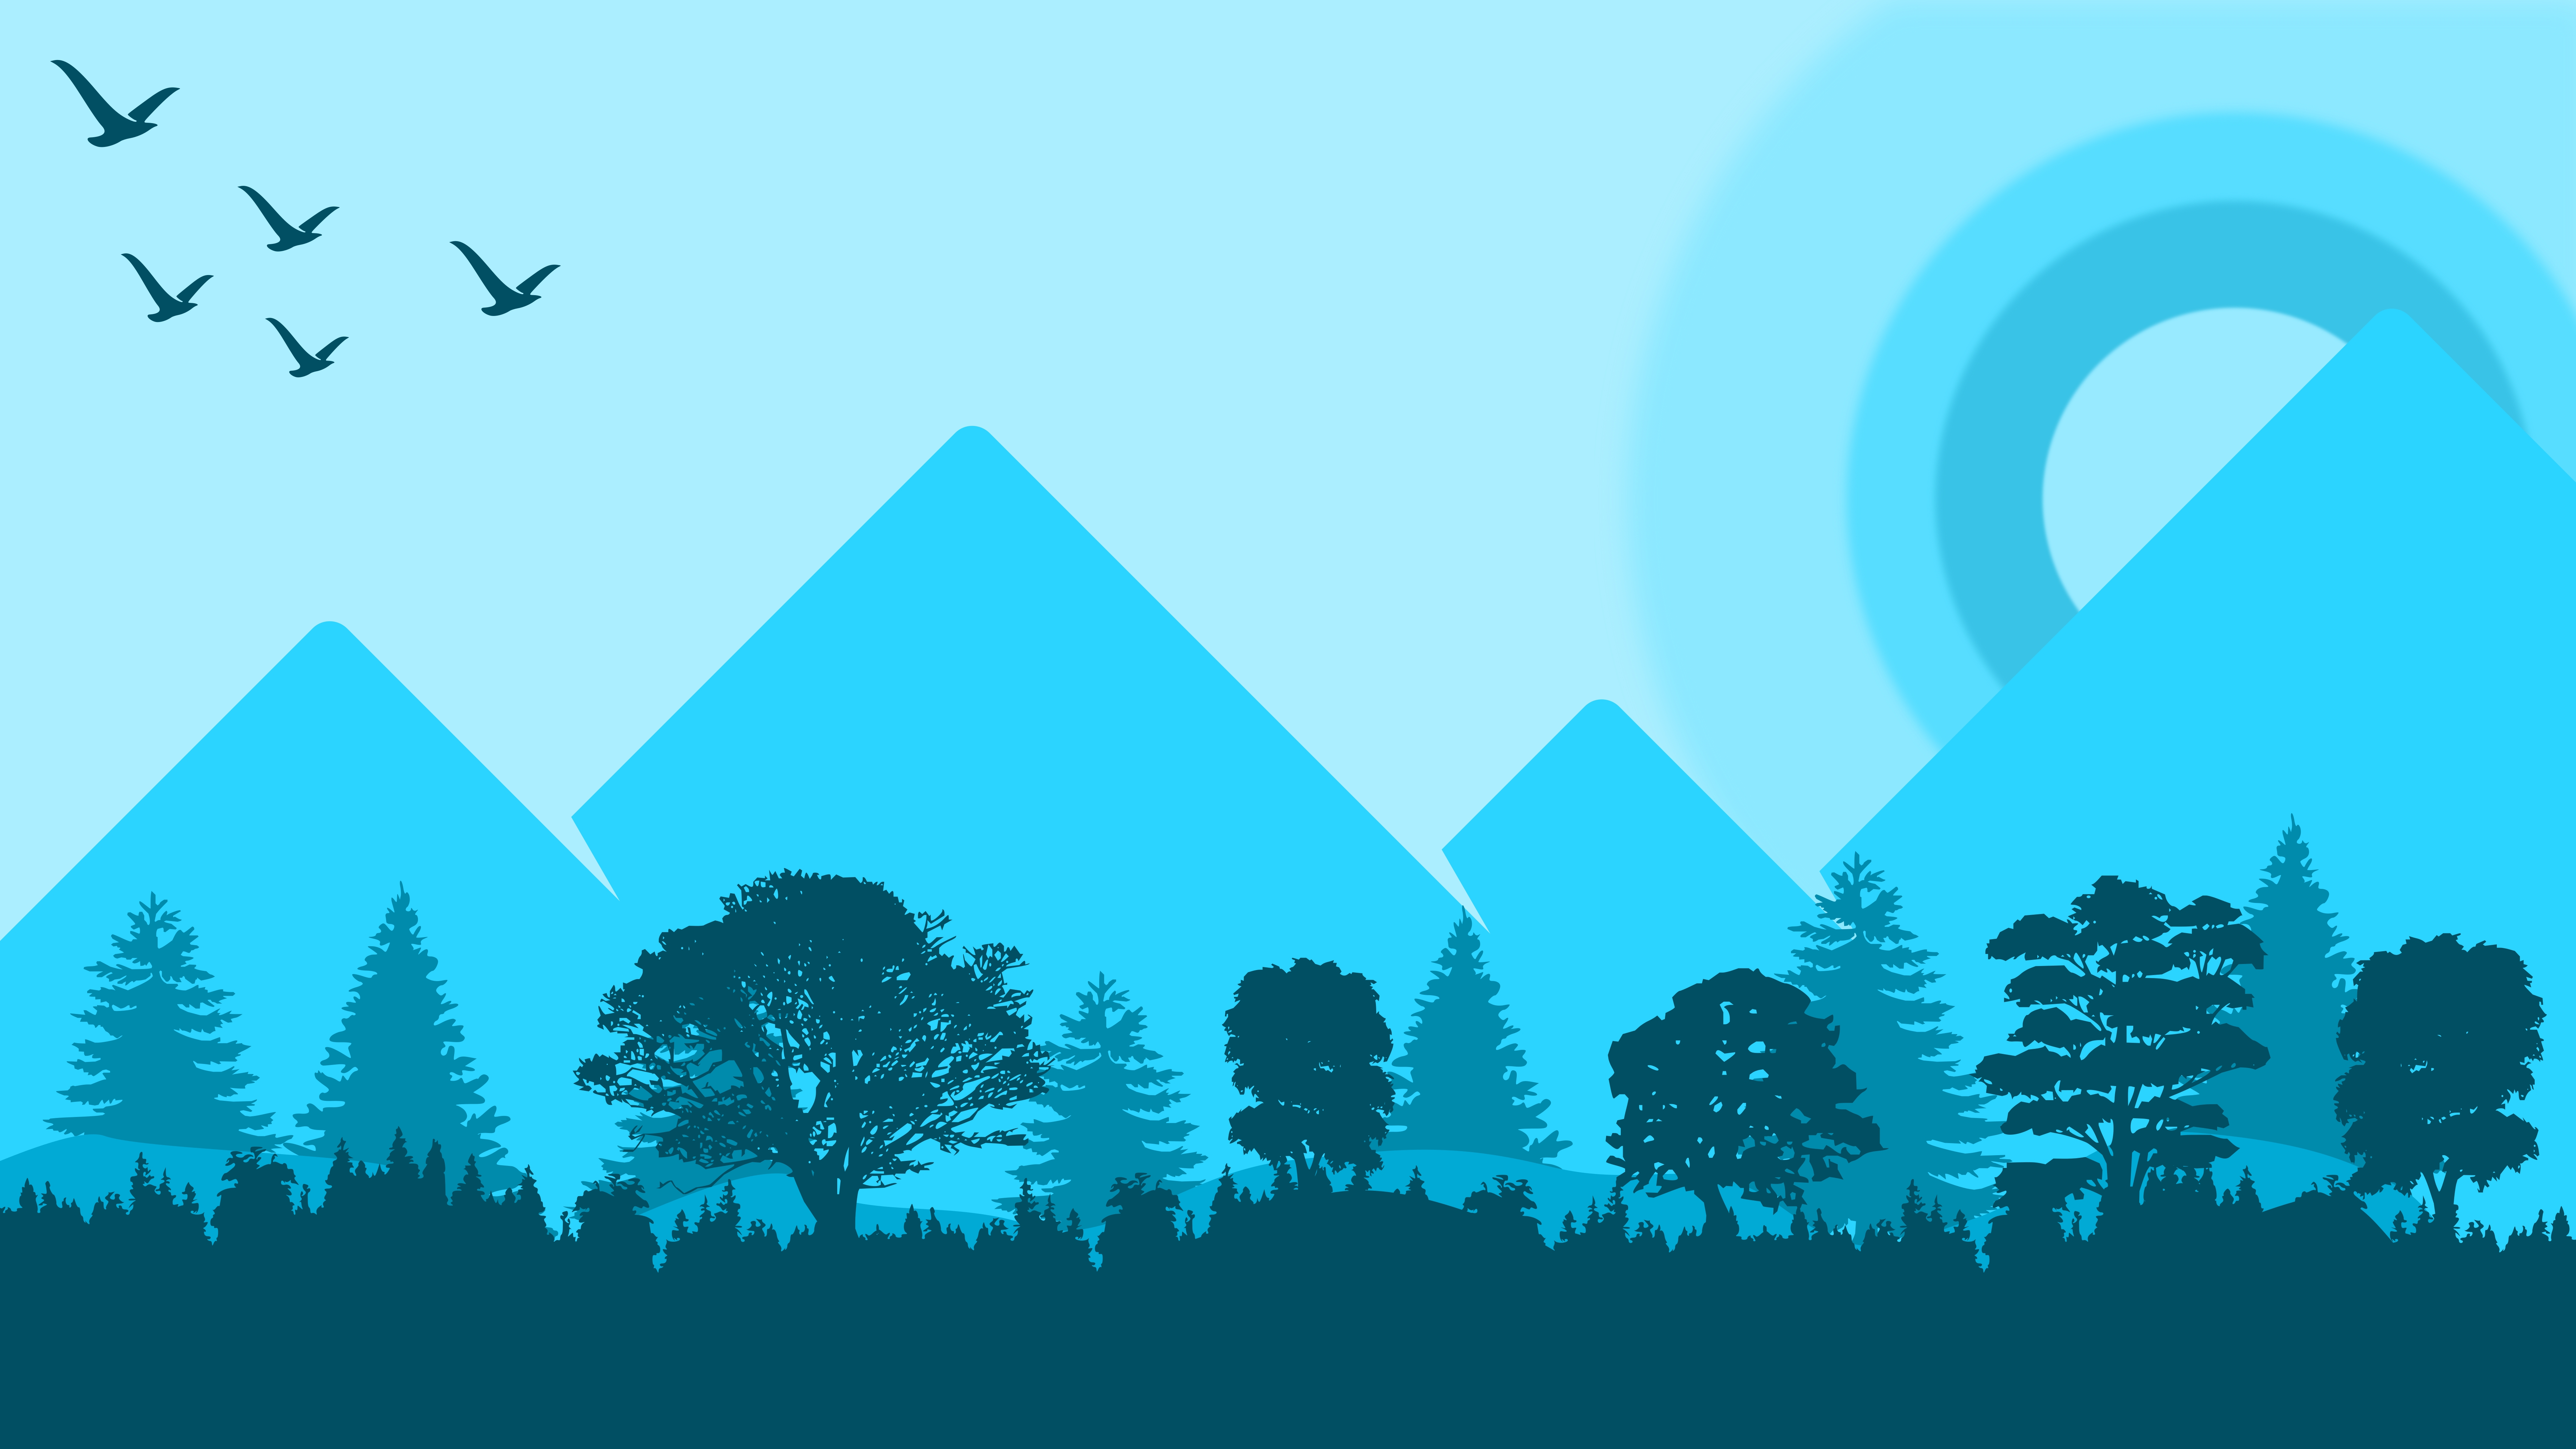 General 7680x4320 abstract 3D Abstract Netural minimalism simple background trees mountains nature birds digital art cyan